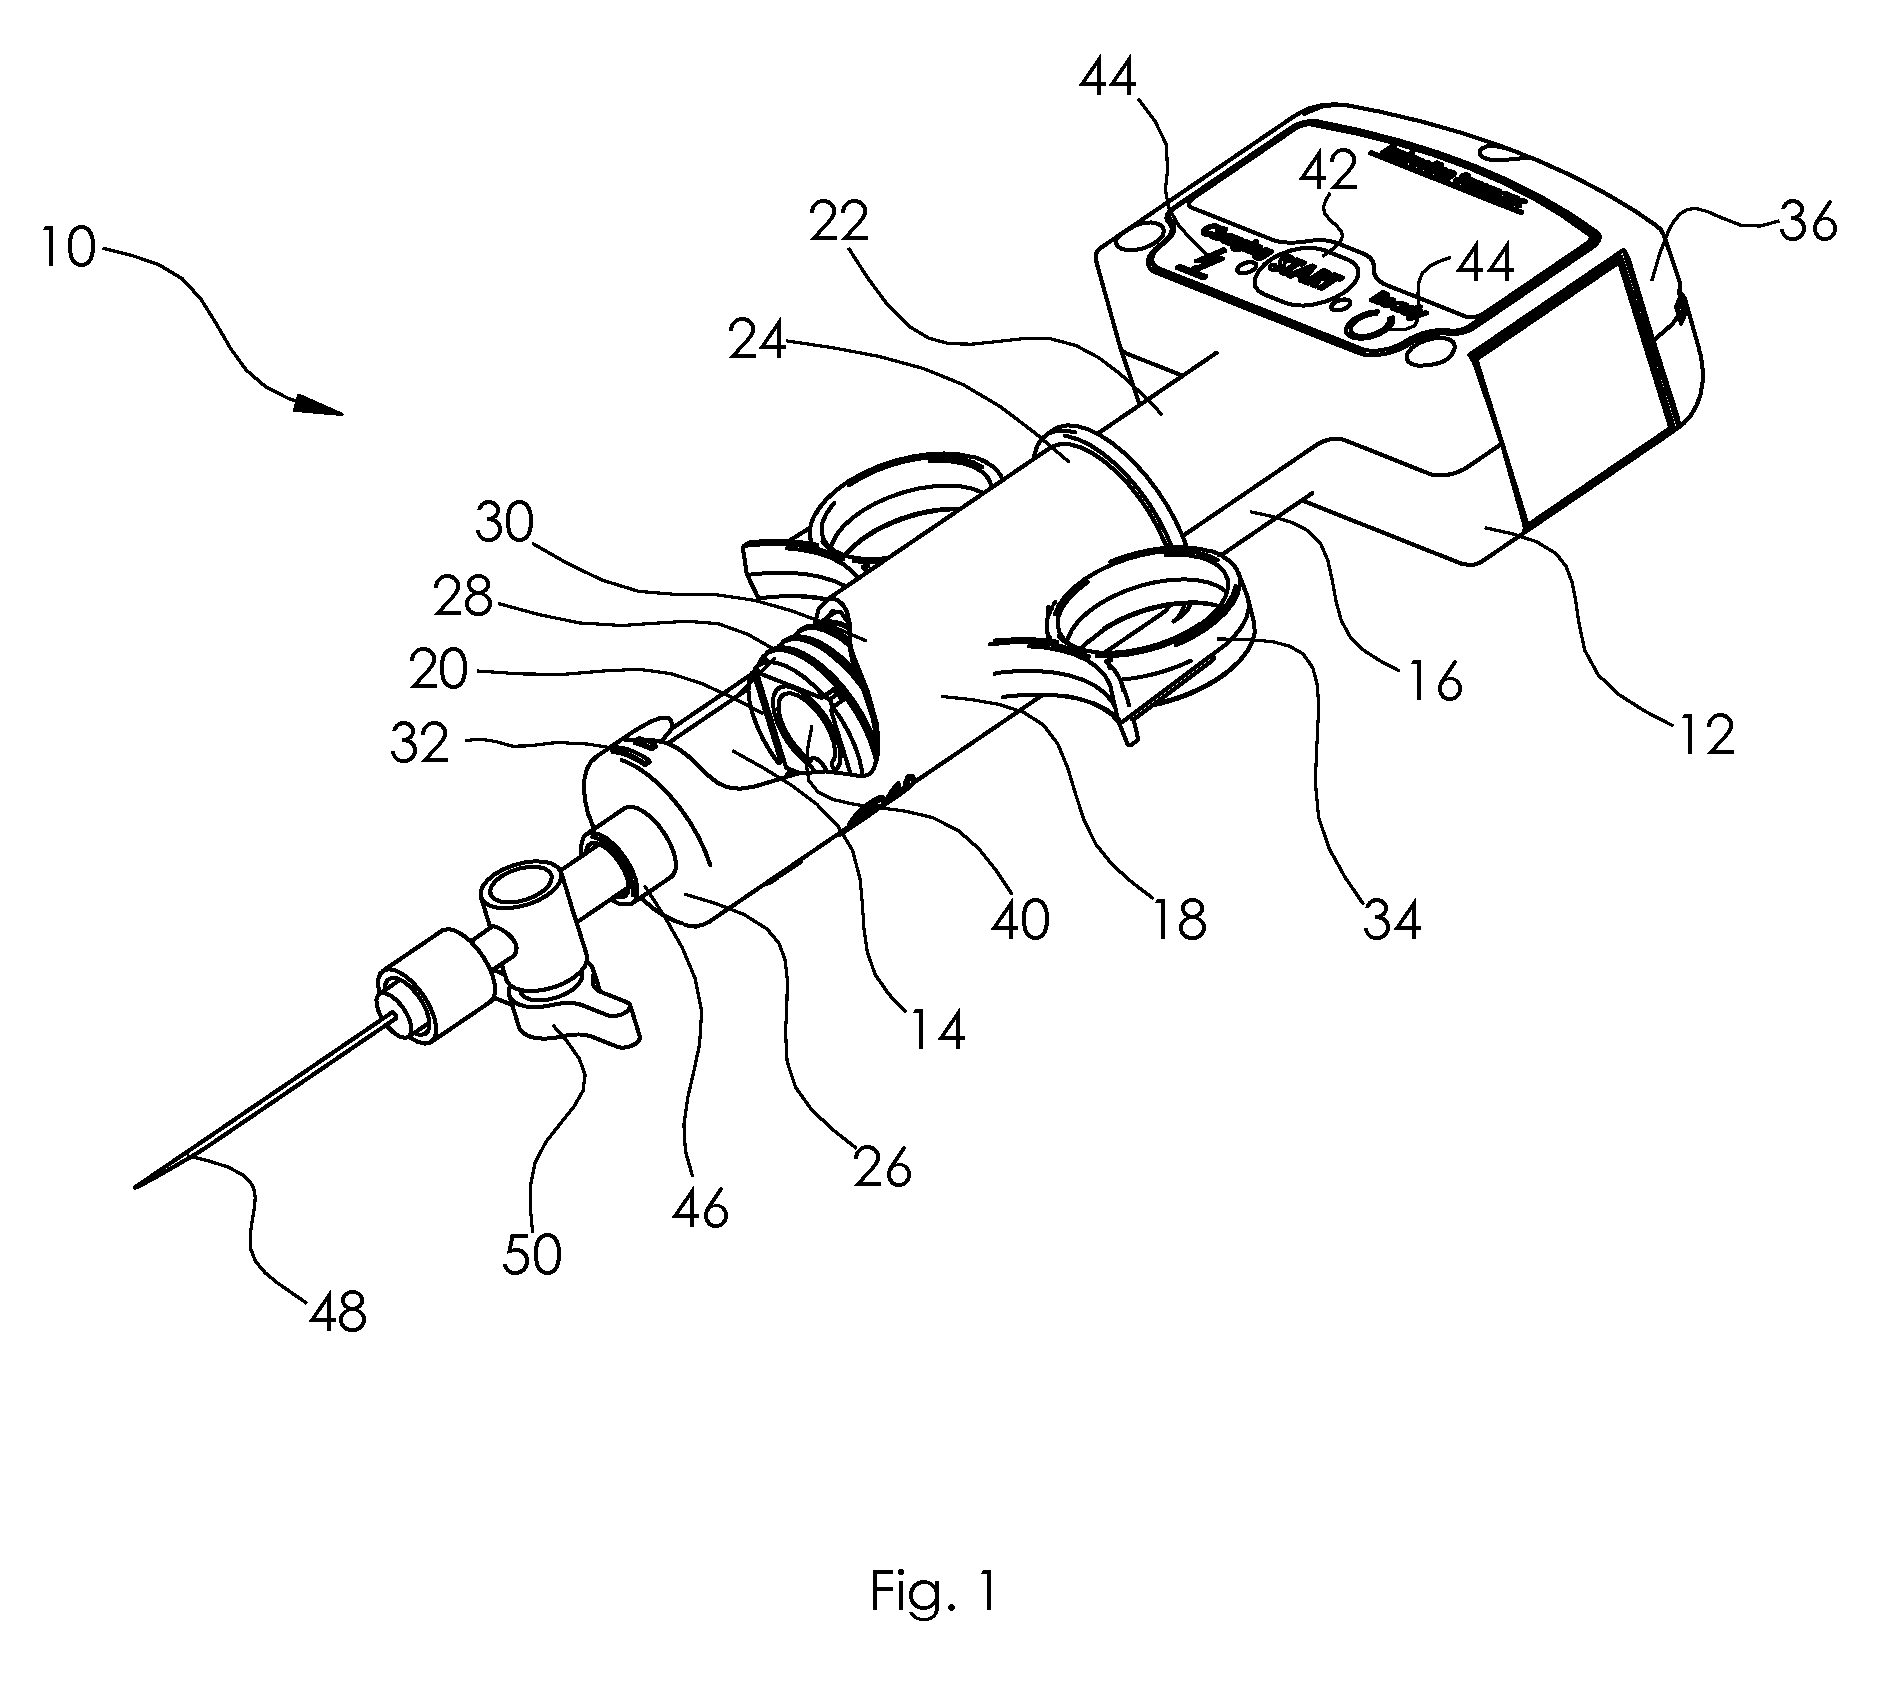 Apparatus and method for treating and dispensing a material into tissue